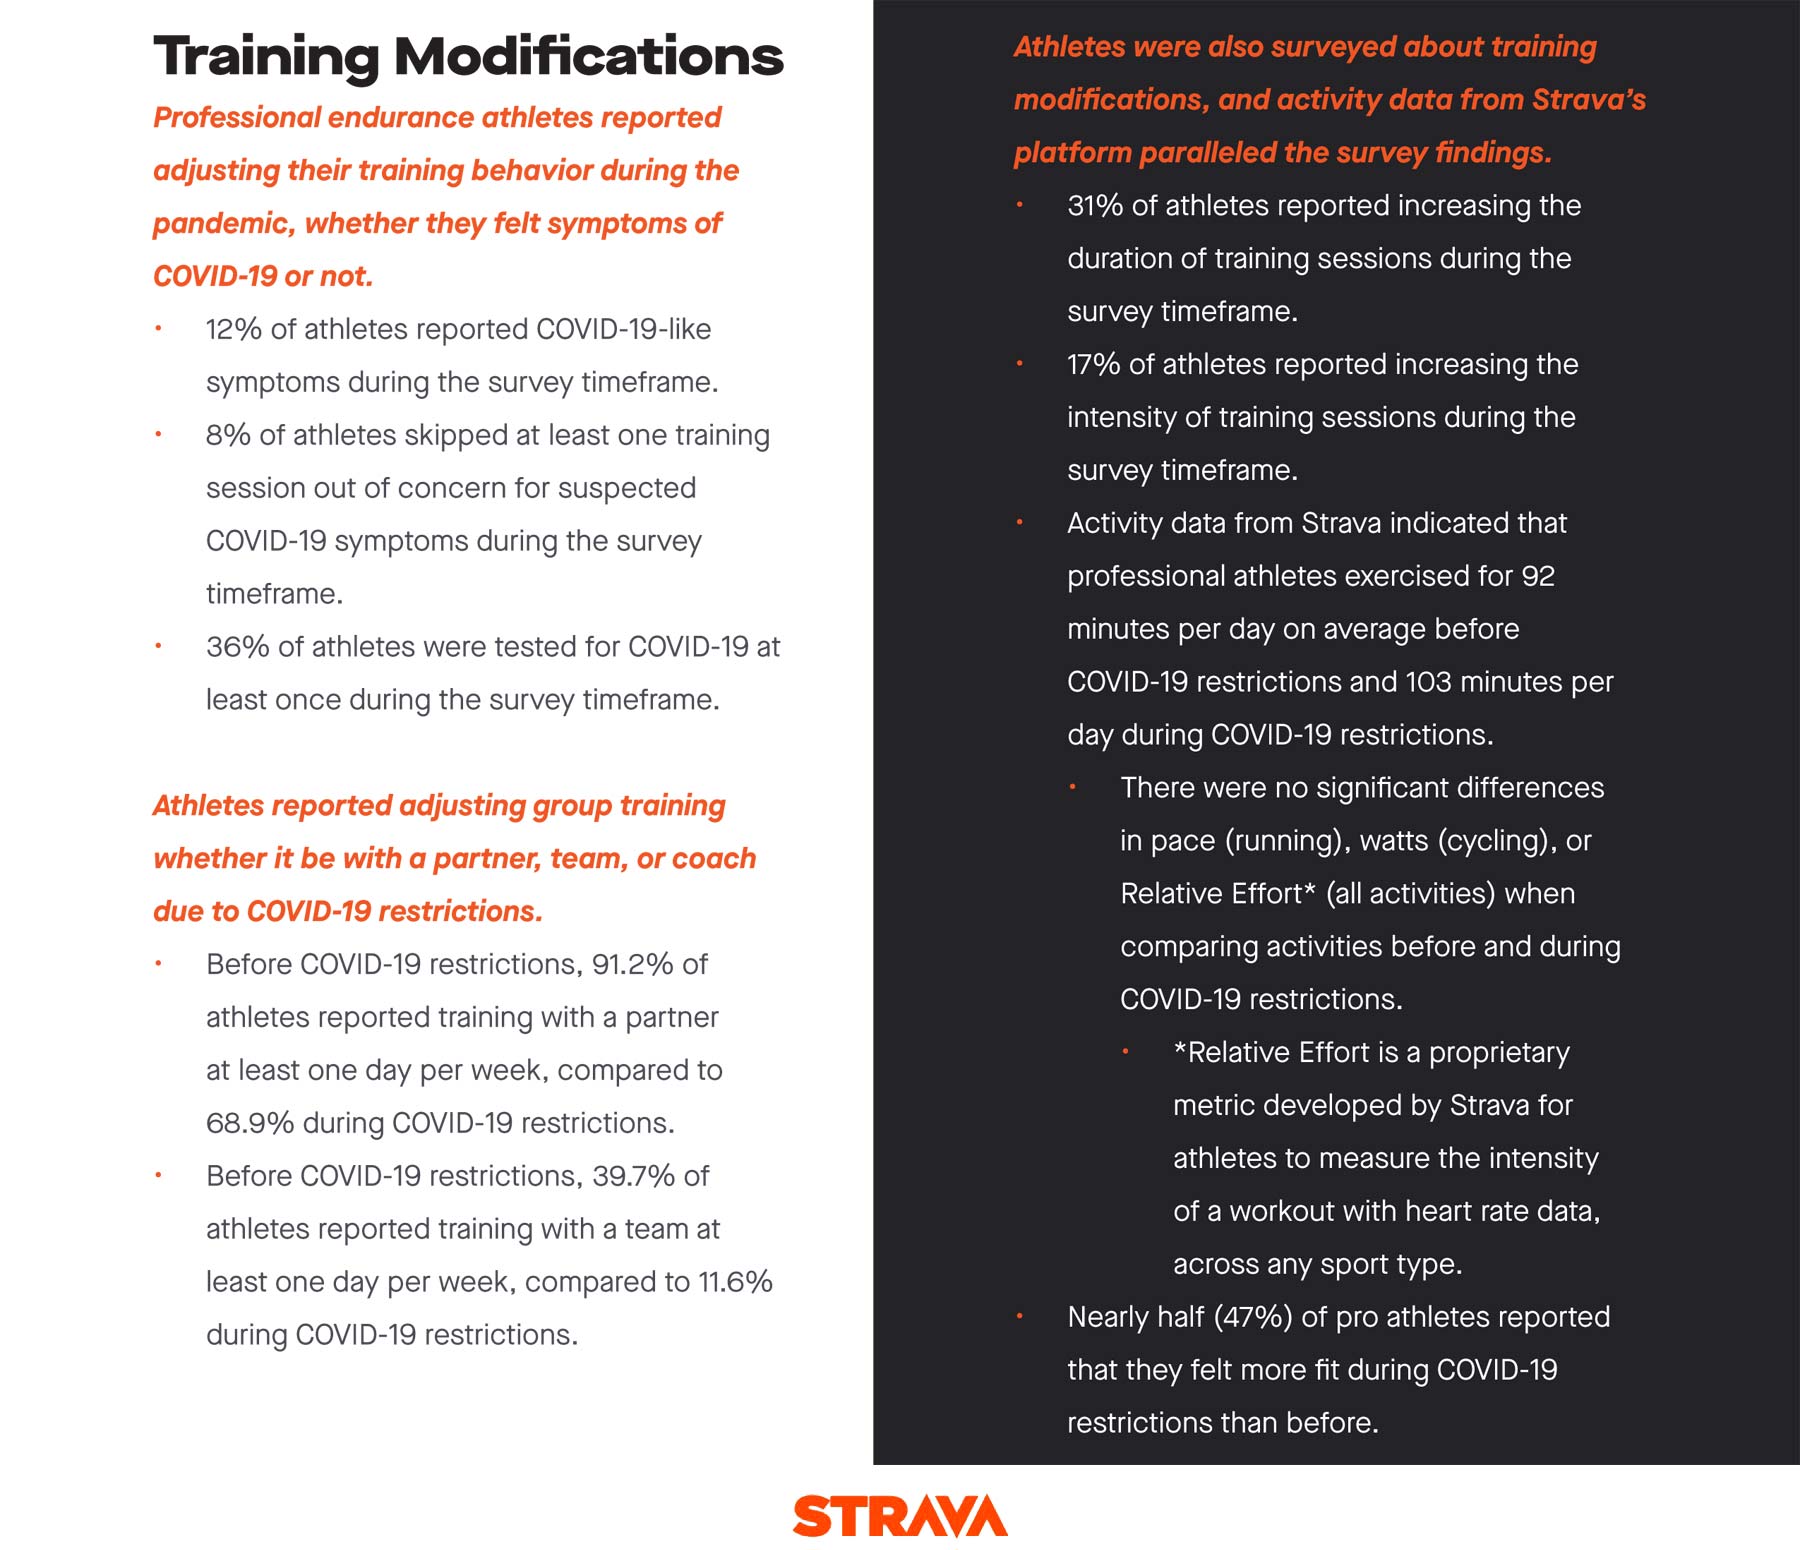 Strava + Stanford professional athlete COVID-19 impacts study, Training modifications